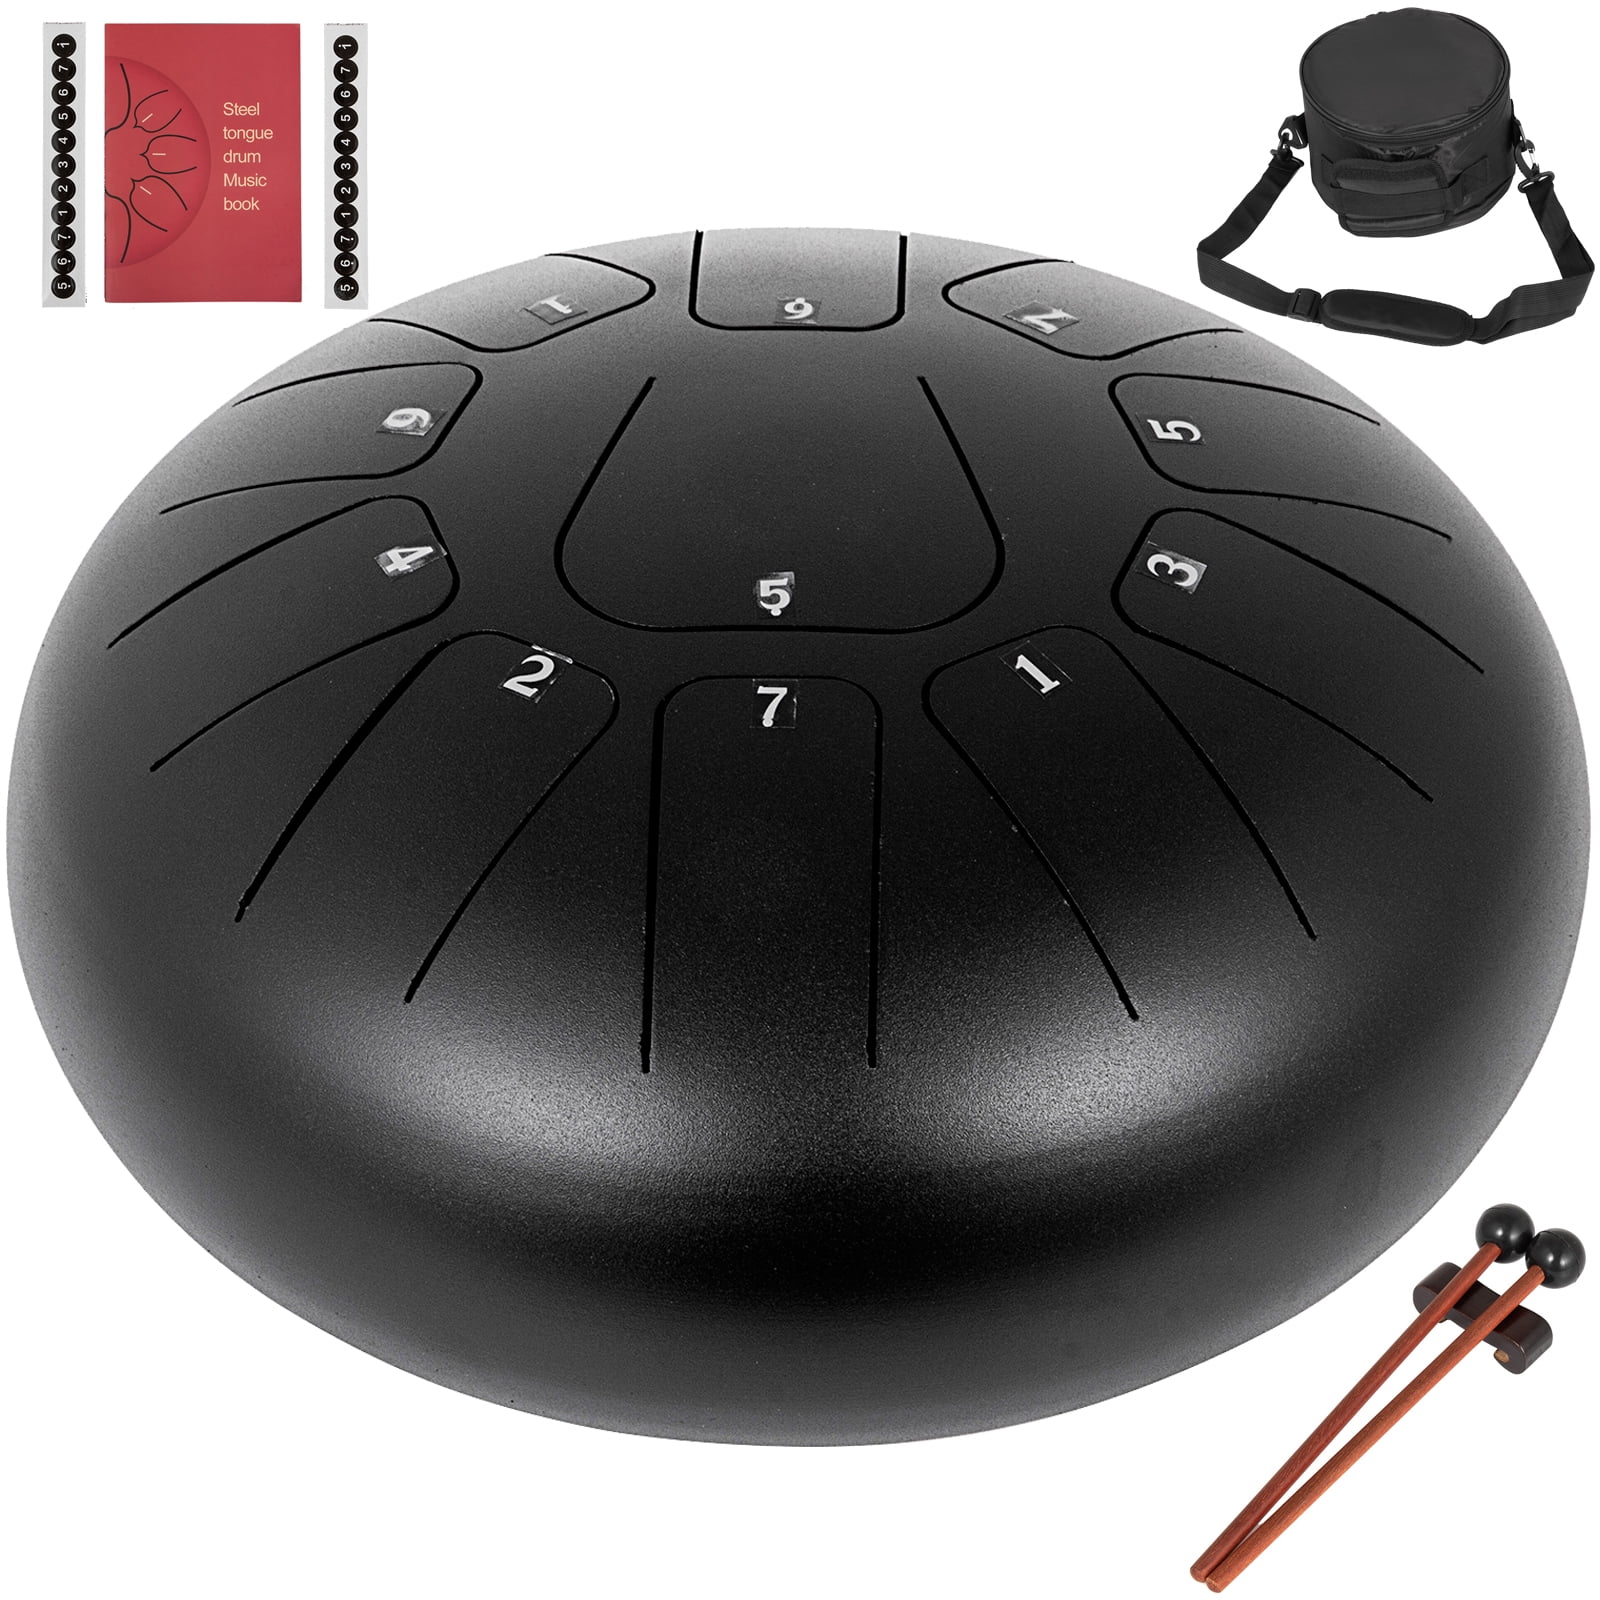 Ubblove Steel Tongue Drum 11 Notes 6 inch Handpan Drum Percussion  Instruments with Mallets Bag for Meditation Musical Education Concert Party  Gifts 